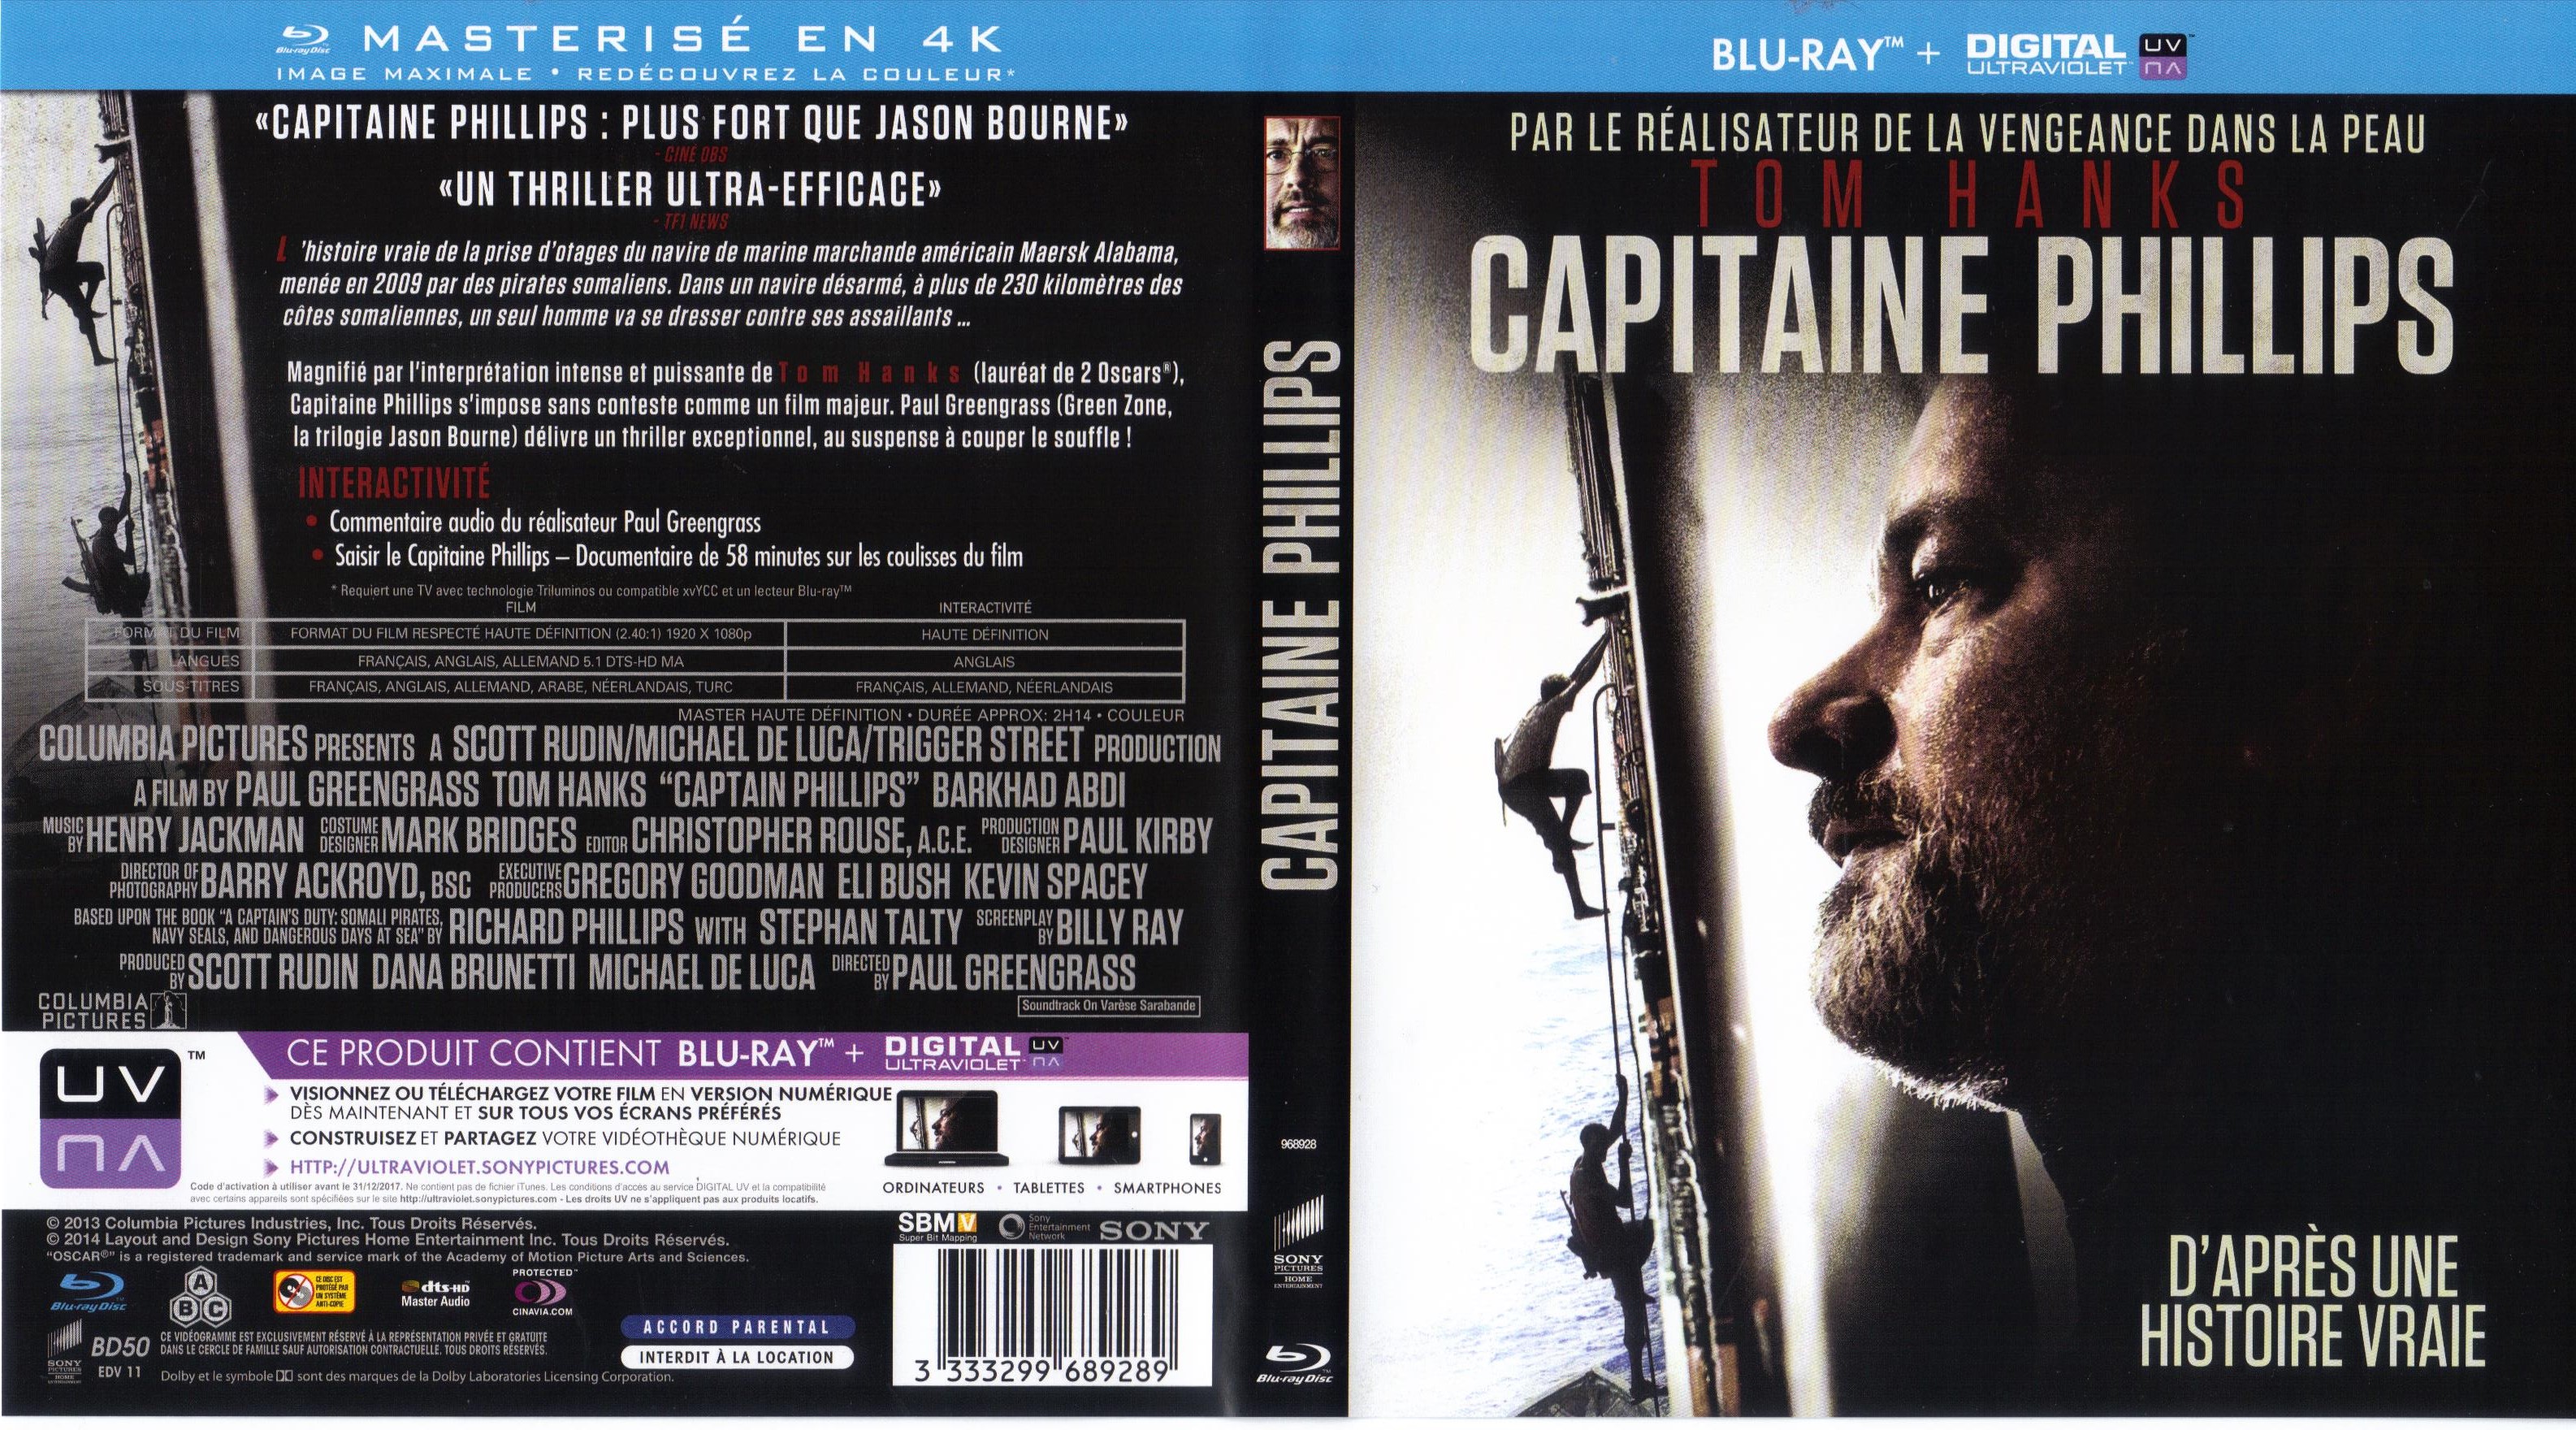 Jaquette DVD Capitaine Phillips (BLU-RAY)